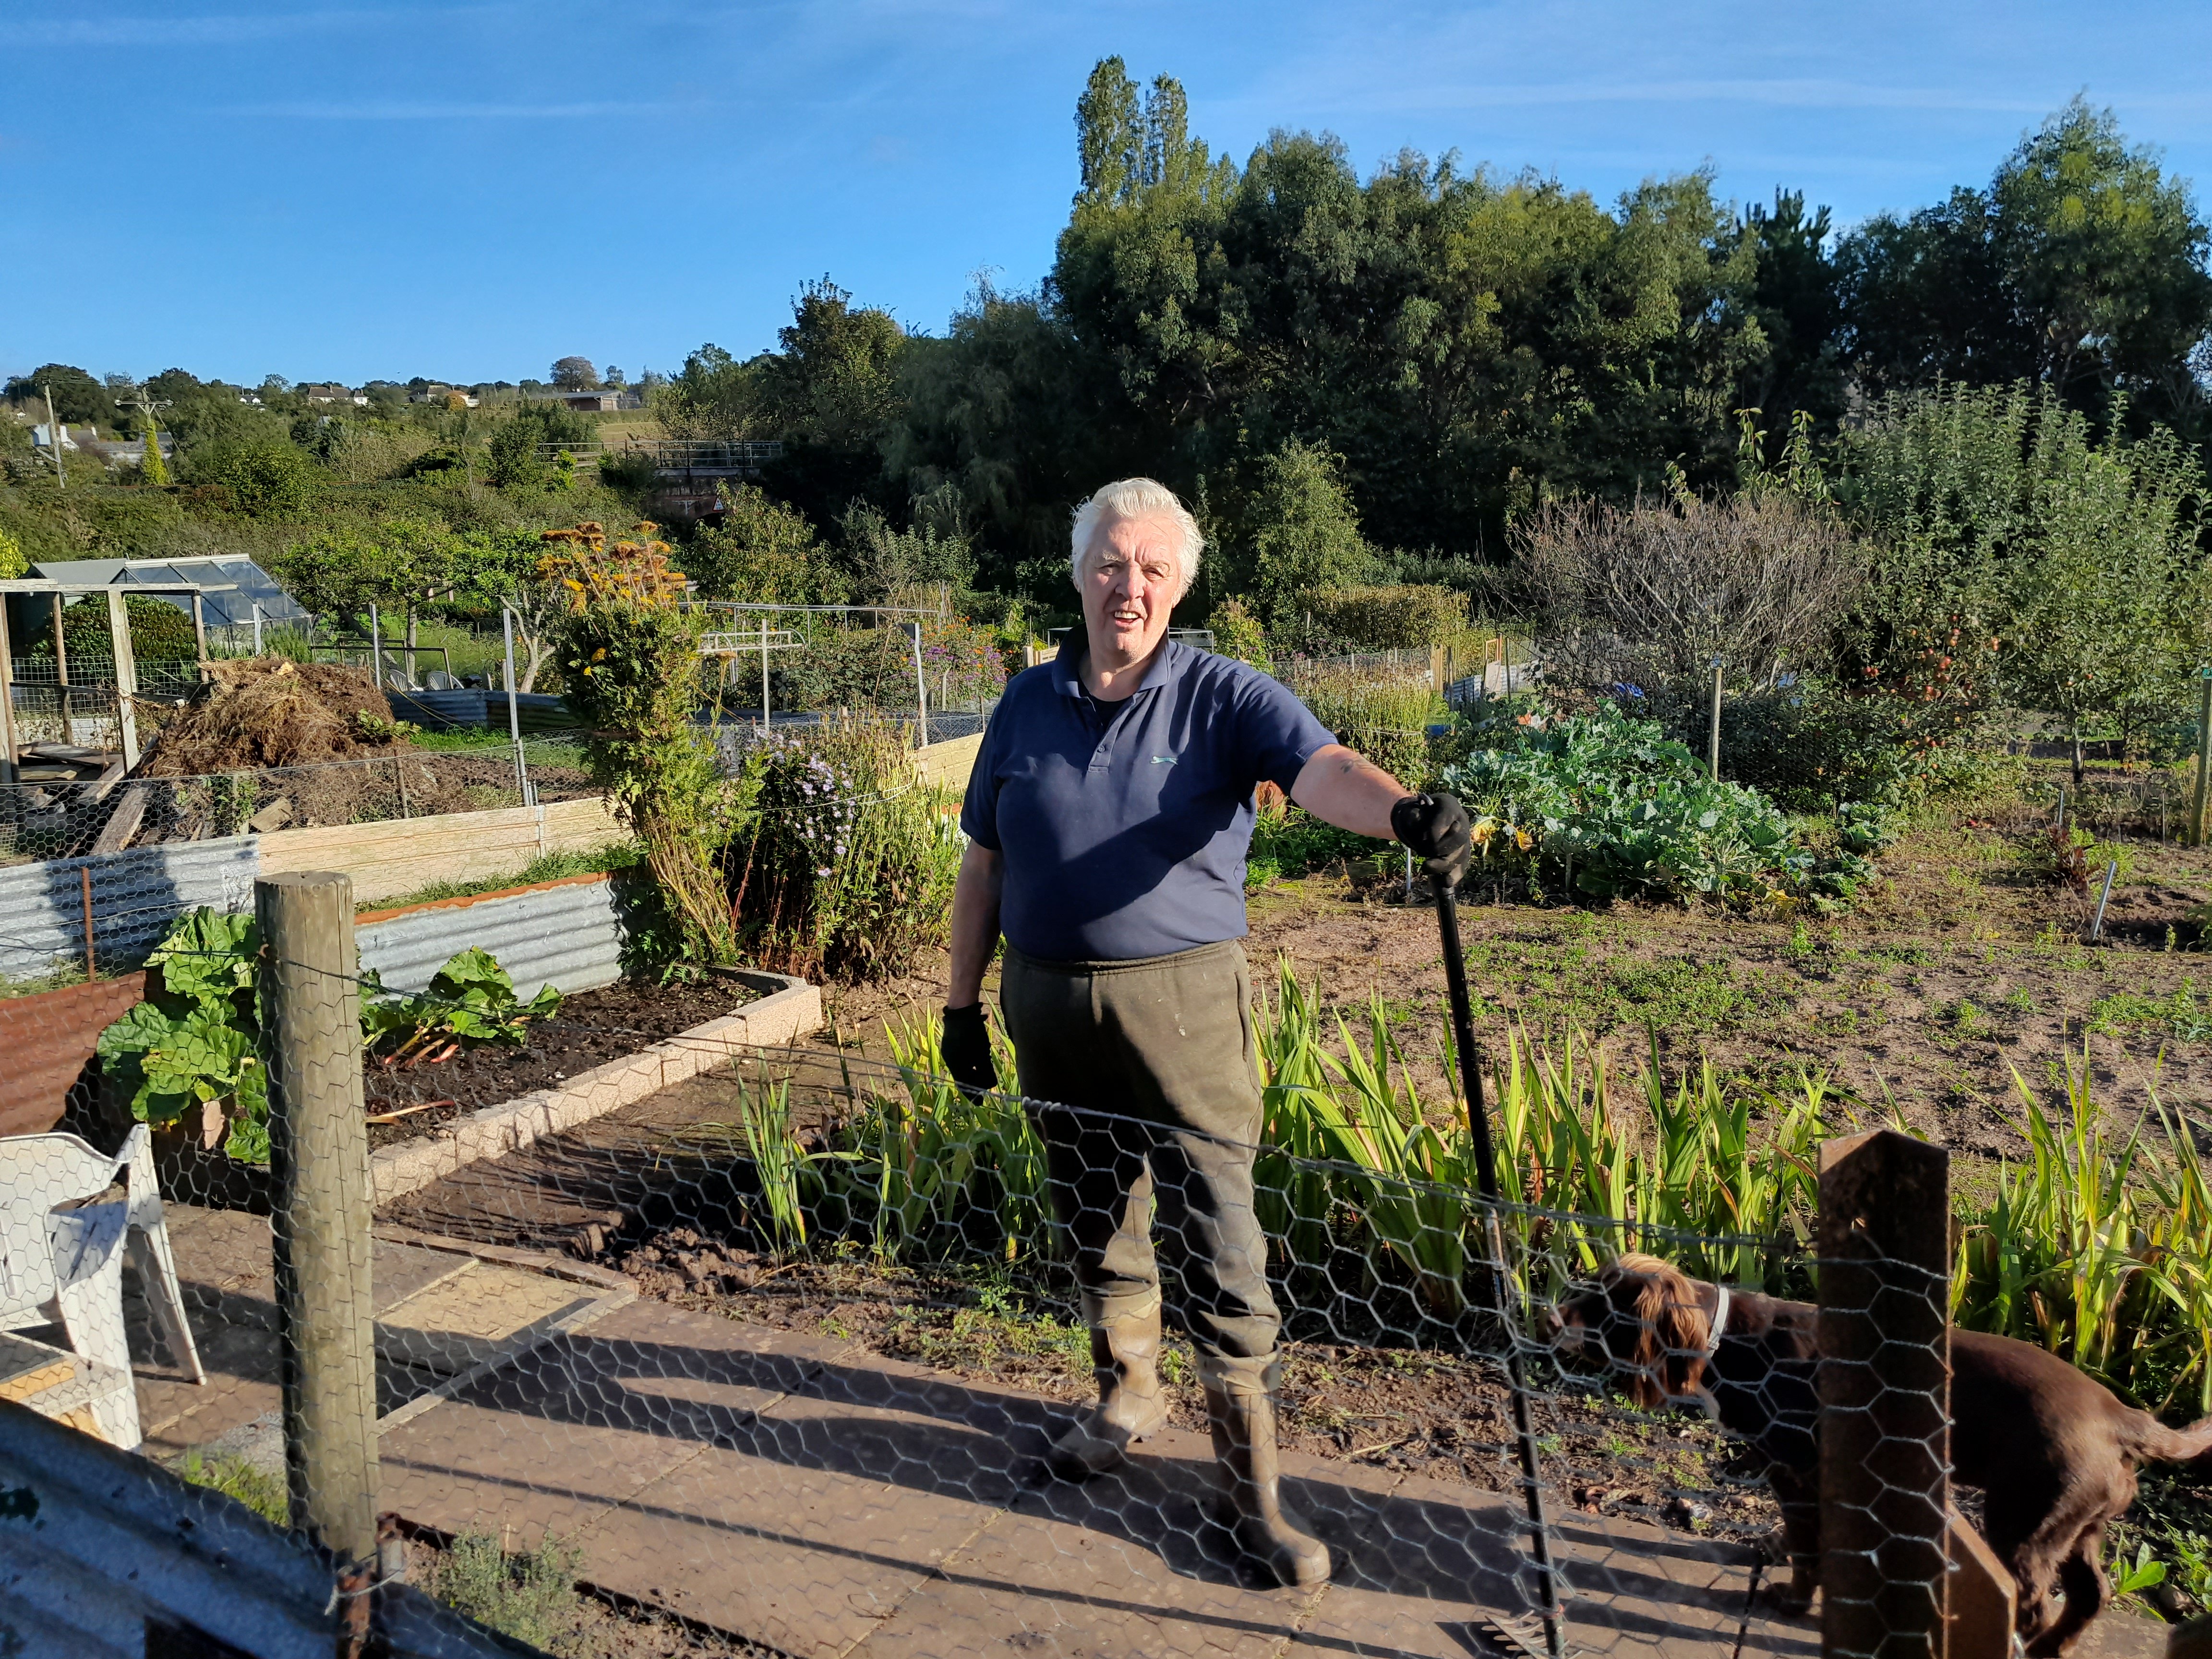 Bill standing proud in his allotment